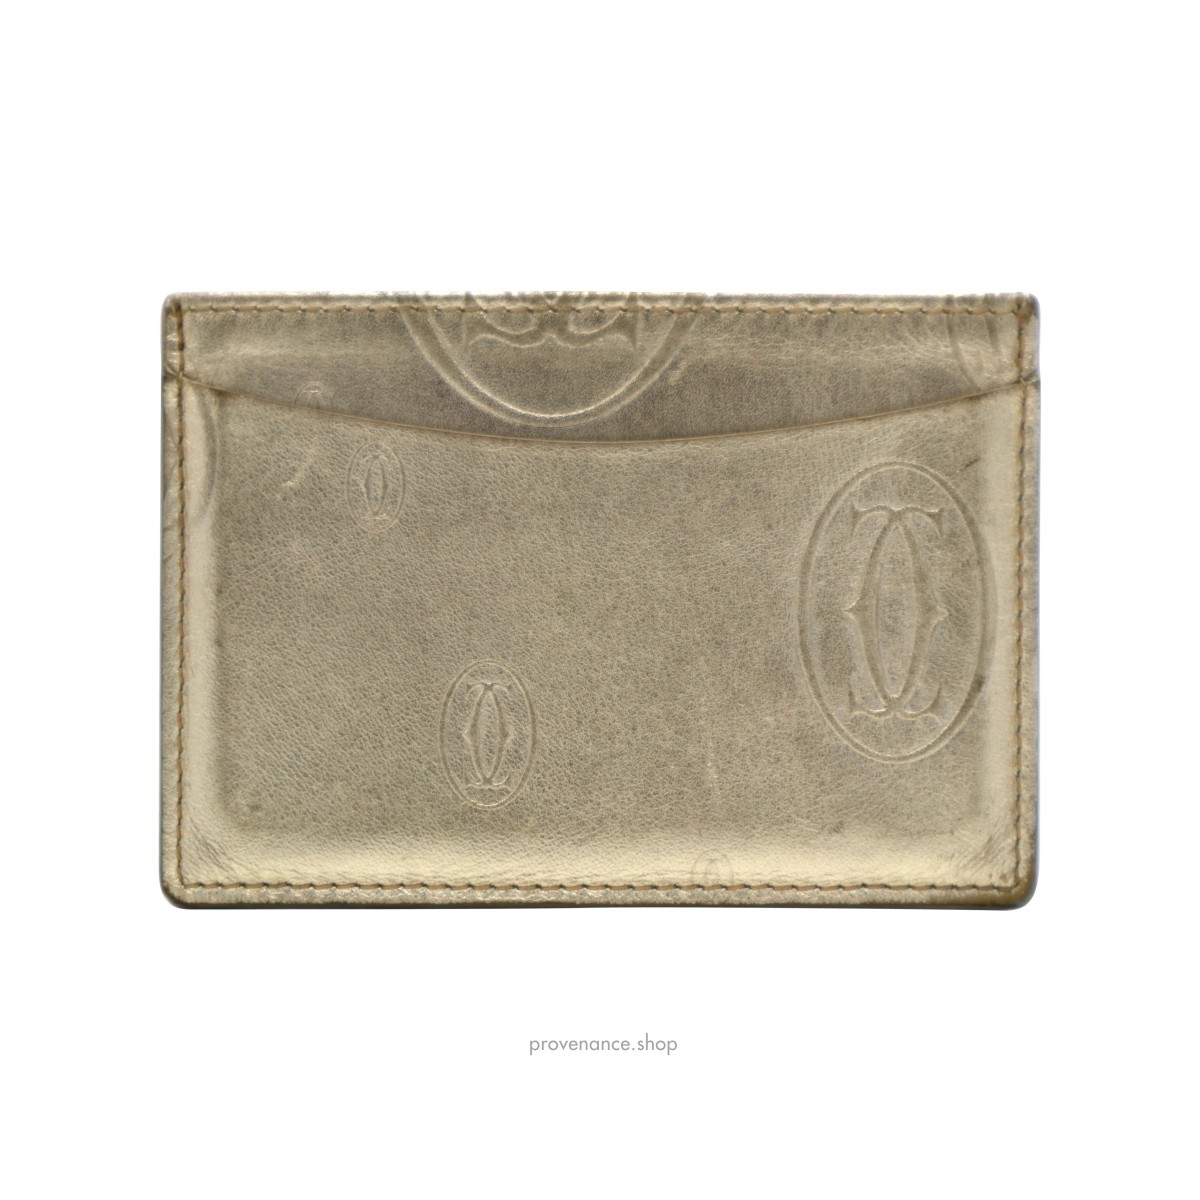 Cartier Happy Cardholder - Metallic Gold Leather - 1